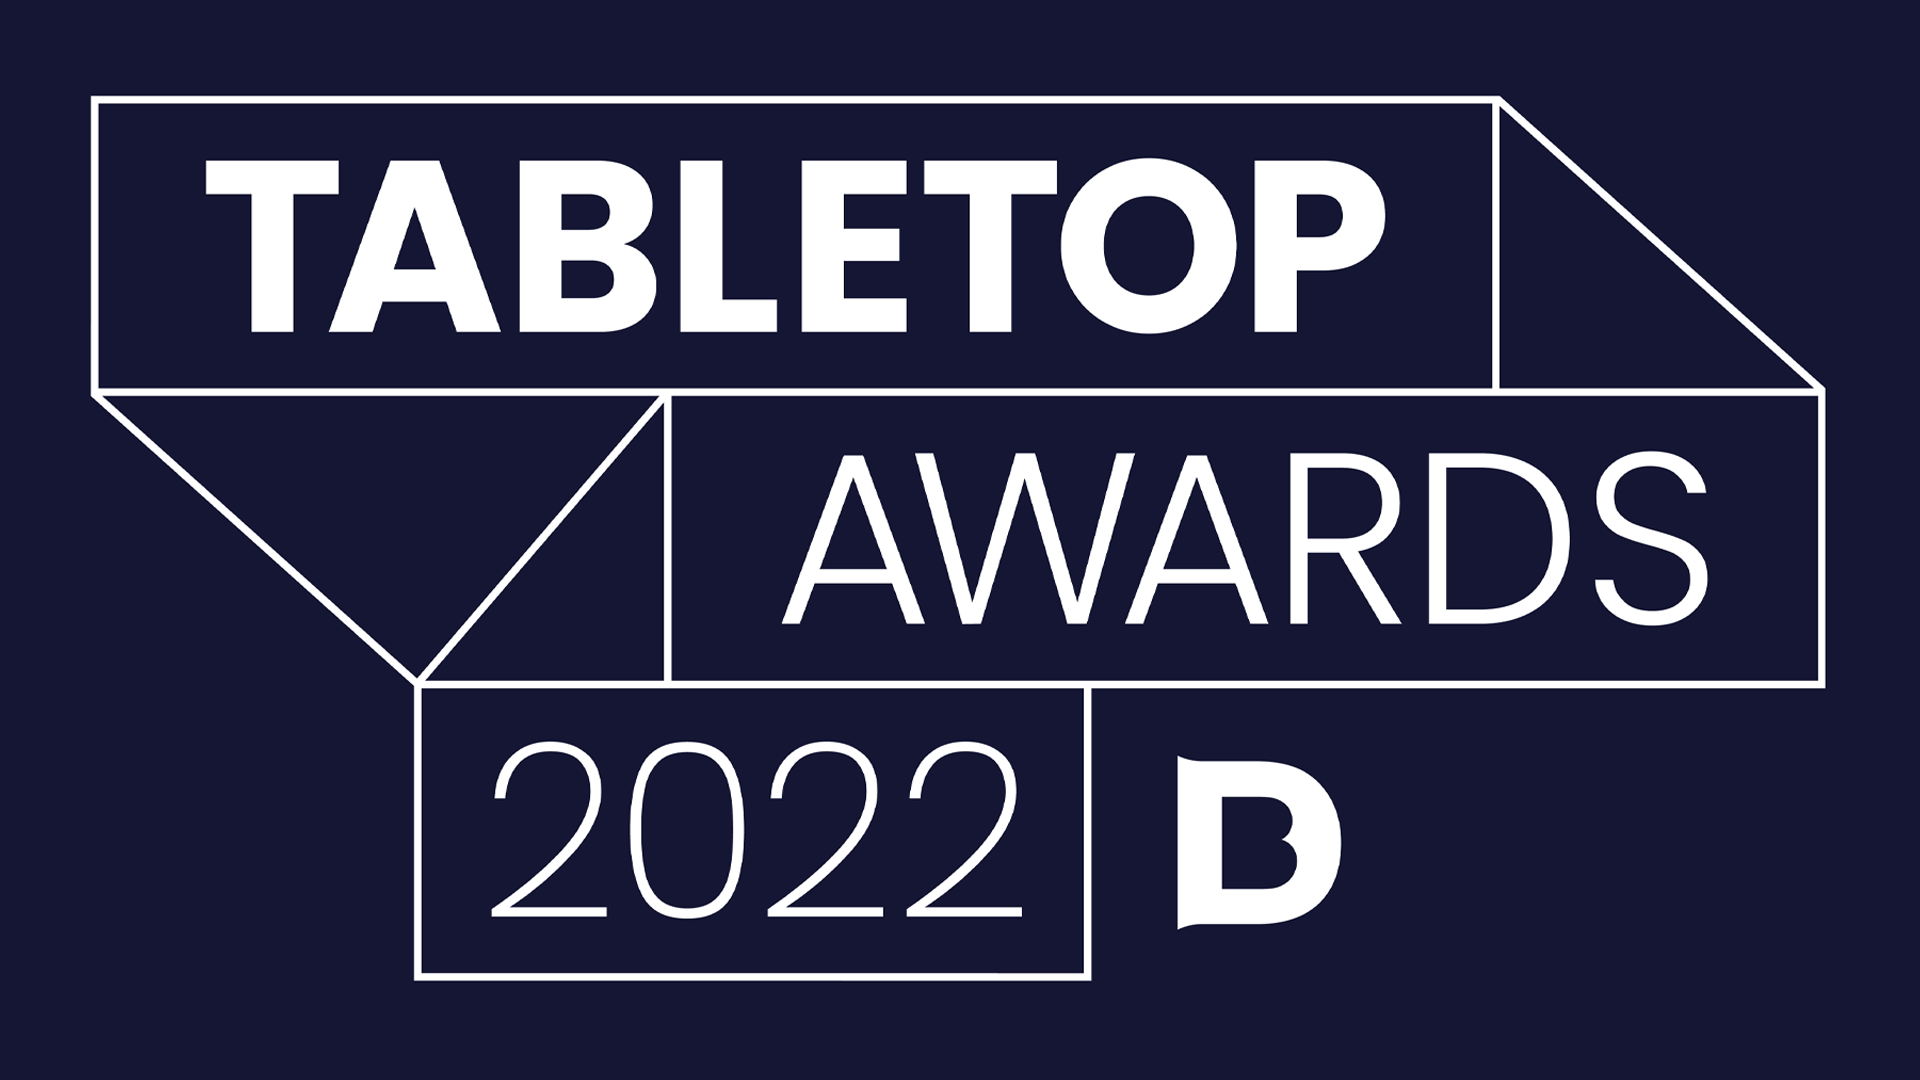 Tabletop Awards 2022 winners: The year’s best board game, RPG, designers and publishers revealed!